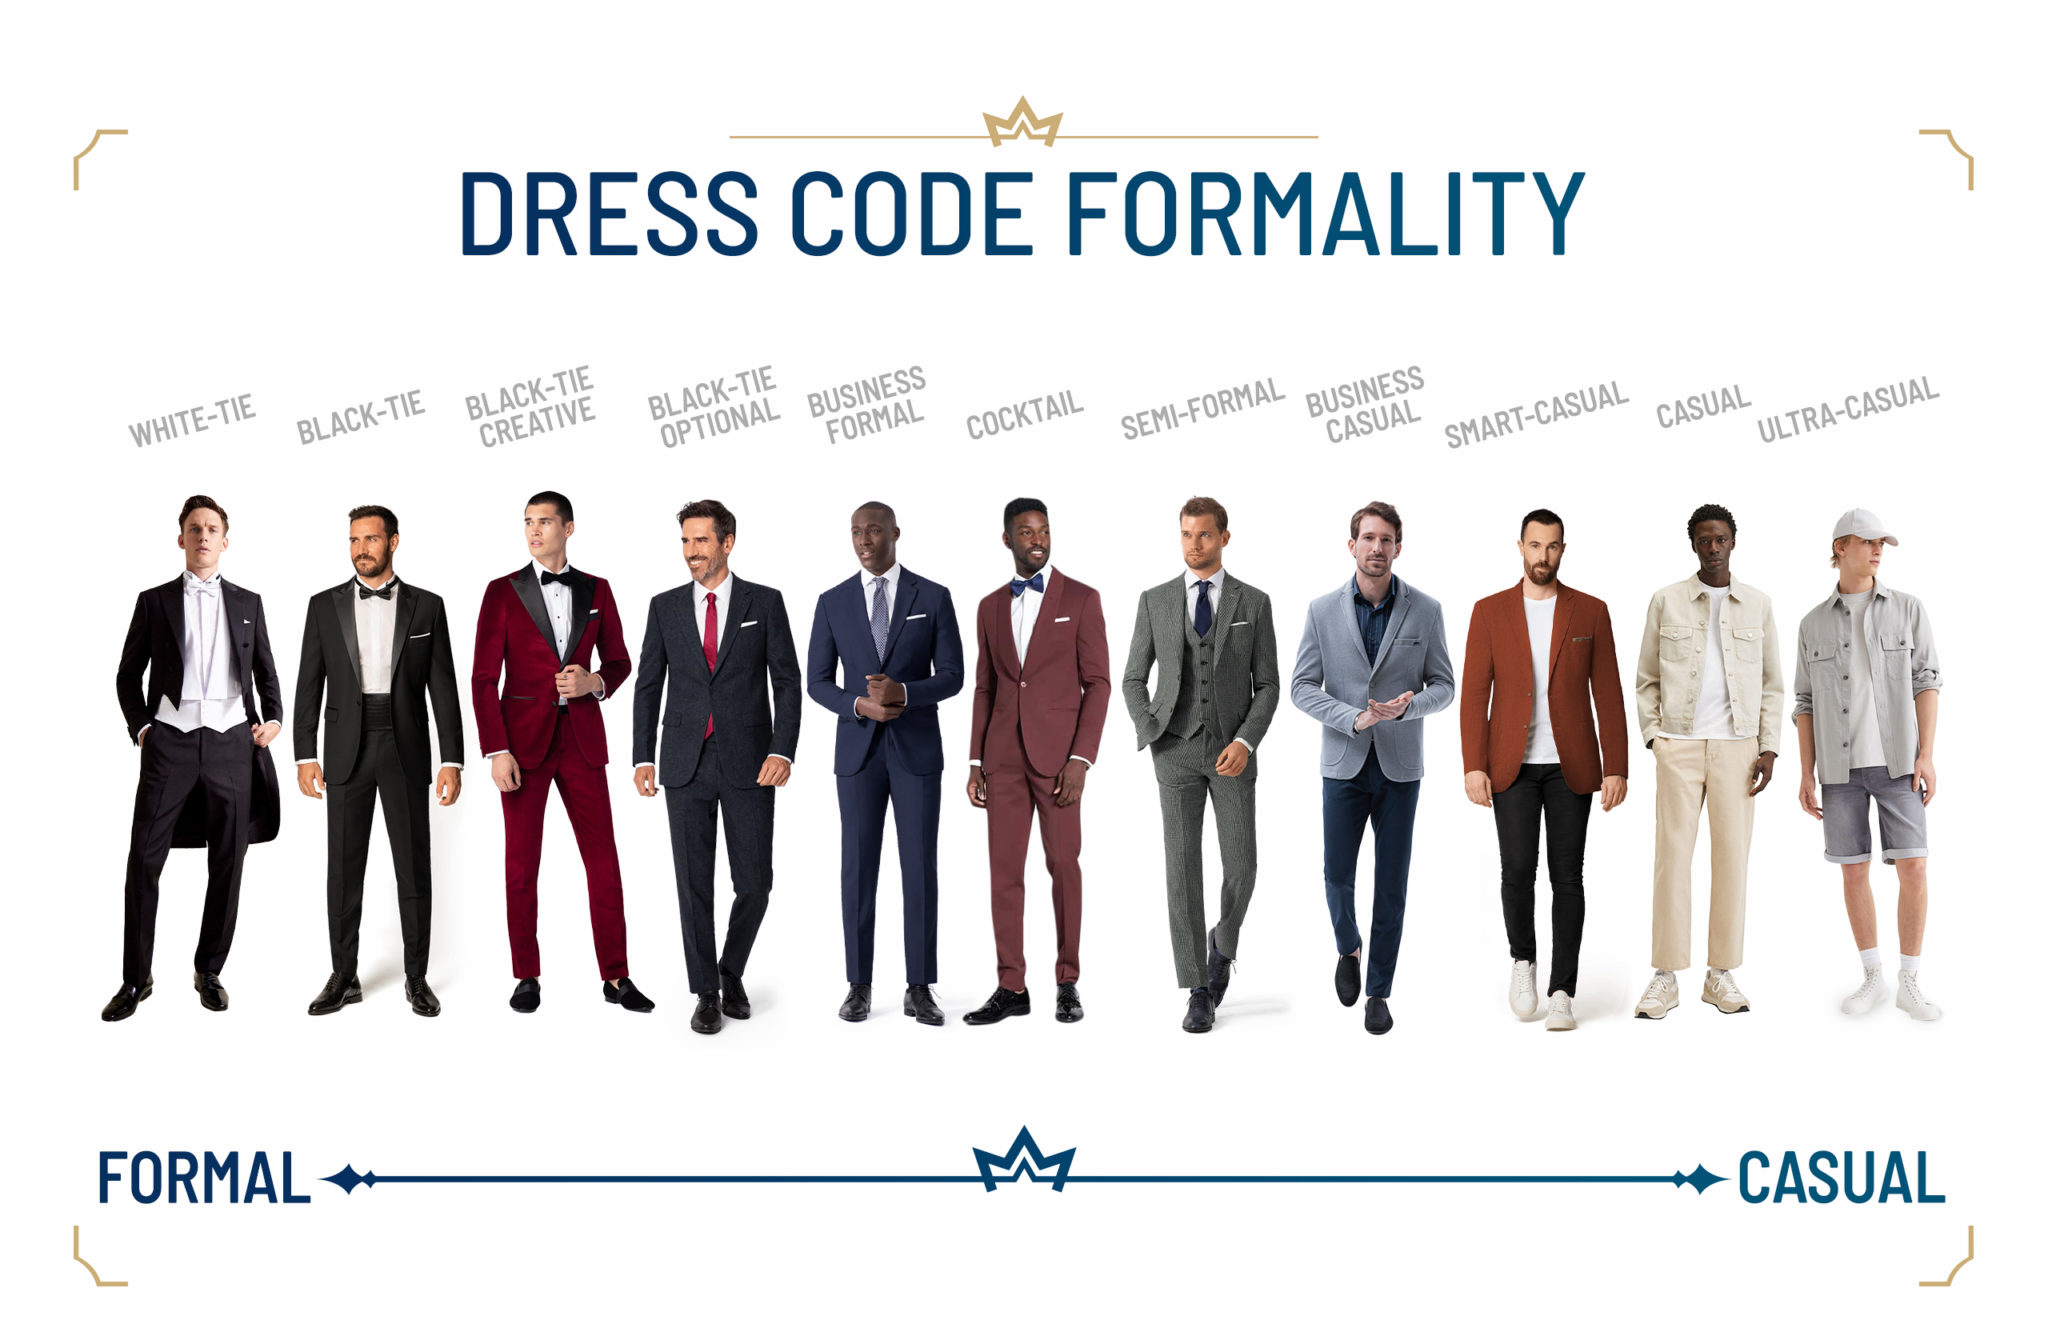 11 Different Types Of Dress Codes For Men